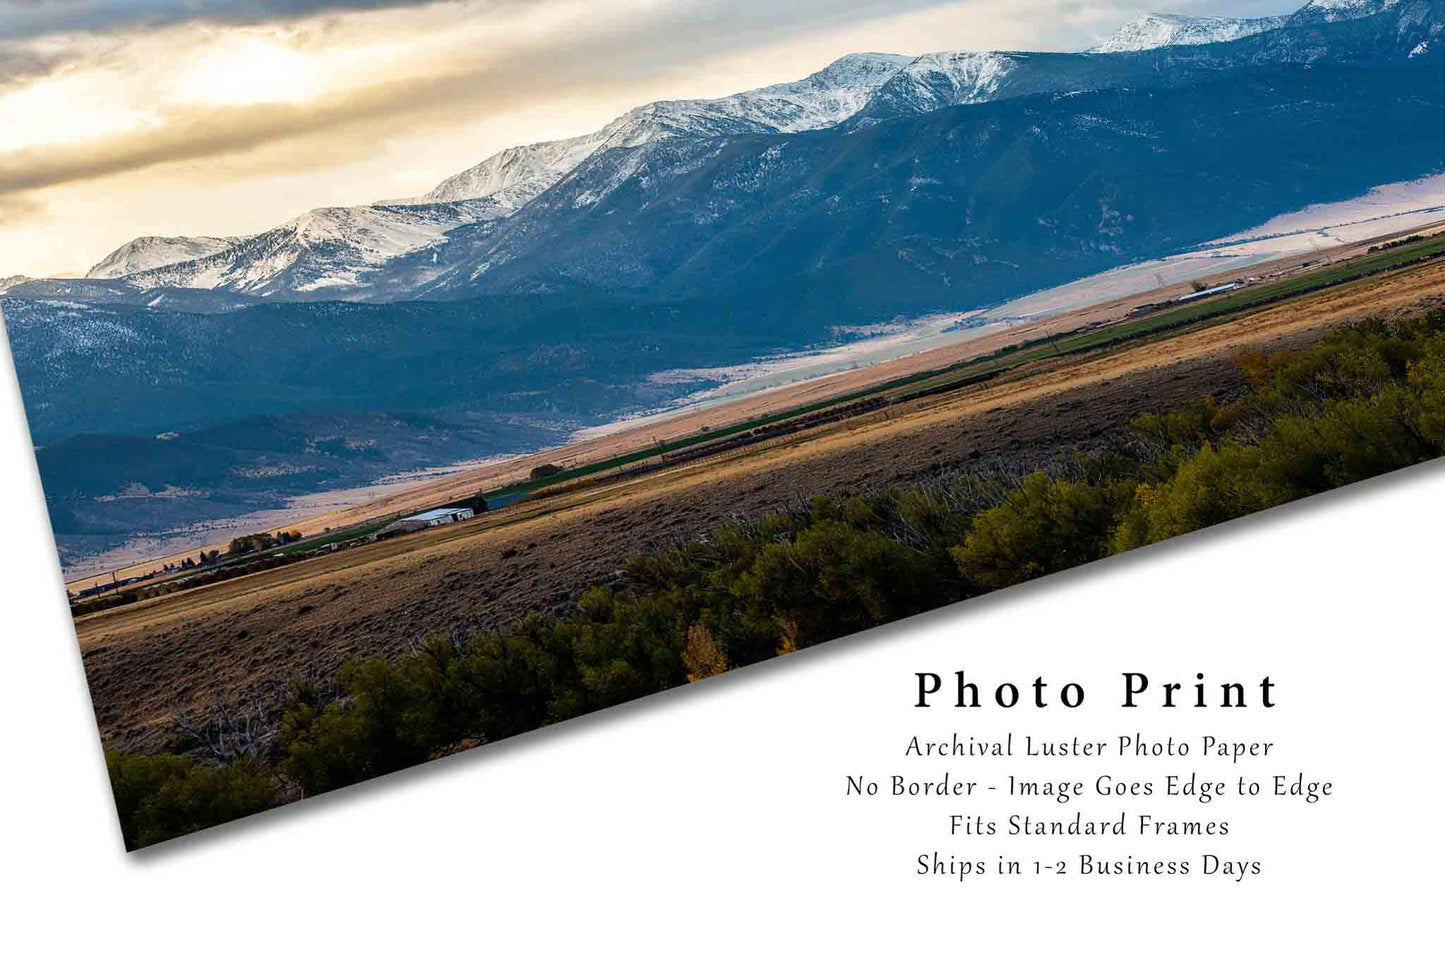 Western Wall Art - Picture of Rocky Mountains in Golden Sunlight in Montana - Landscape Photography Photo Print Artwork Decor